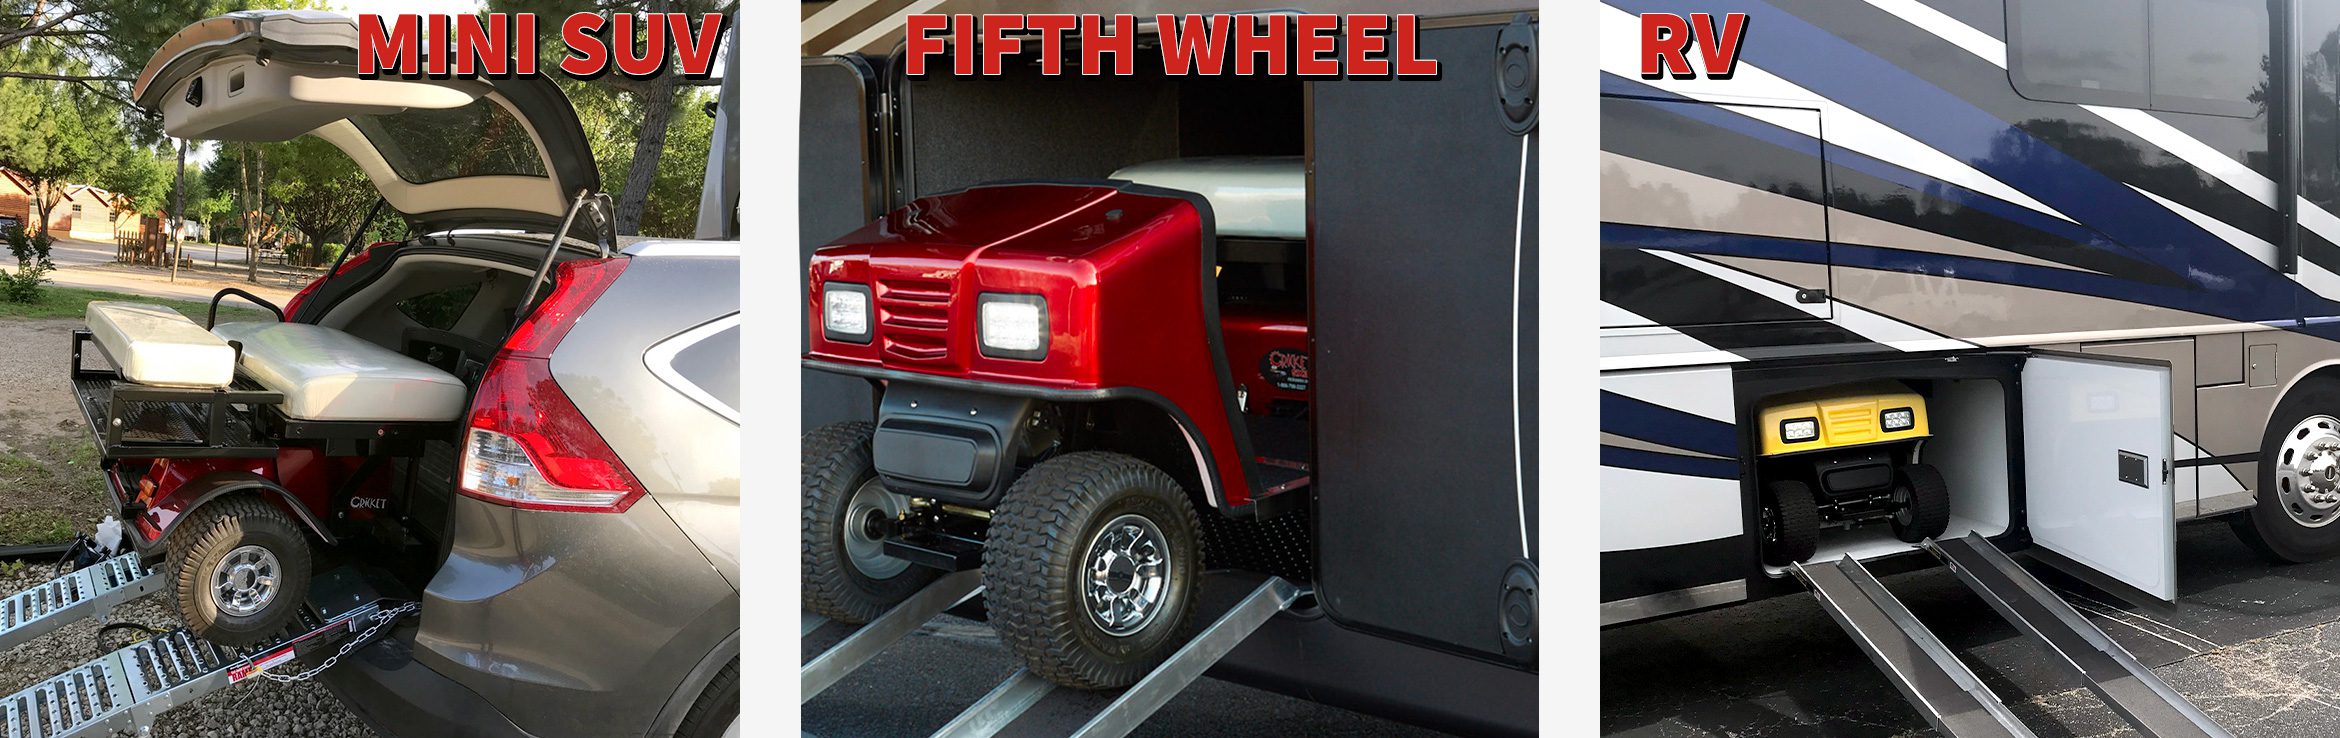 cricket-rv-golf-cart-can-fit-anywhere